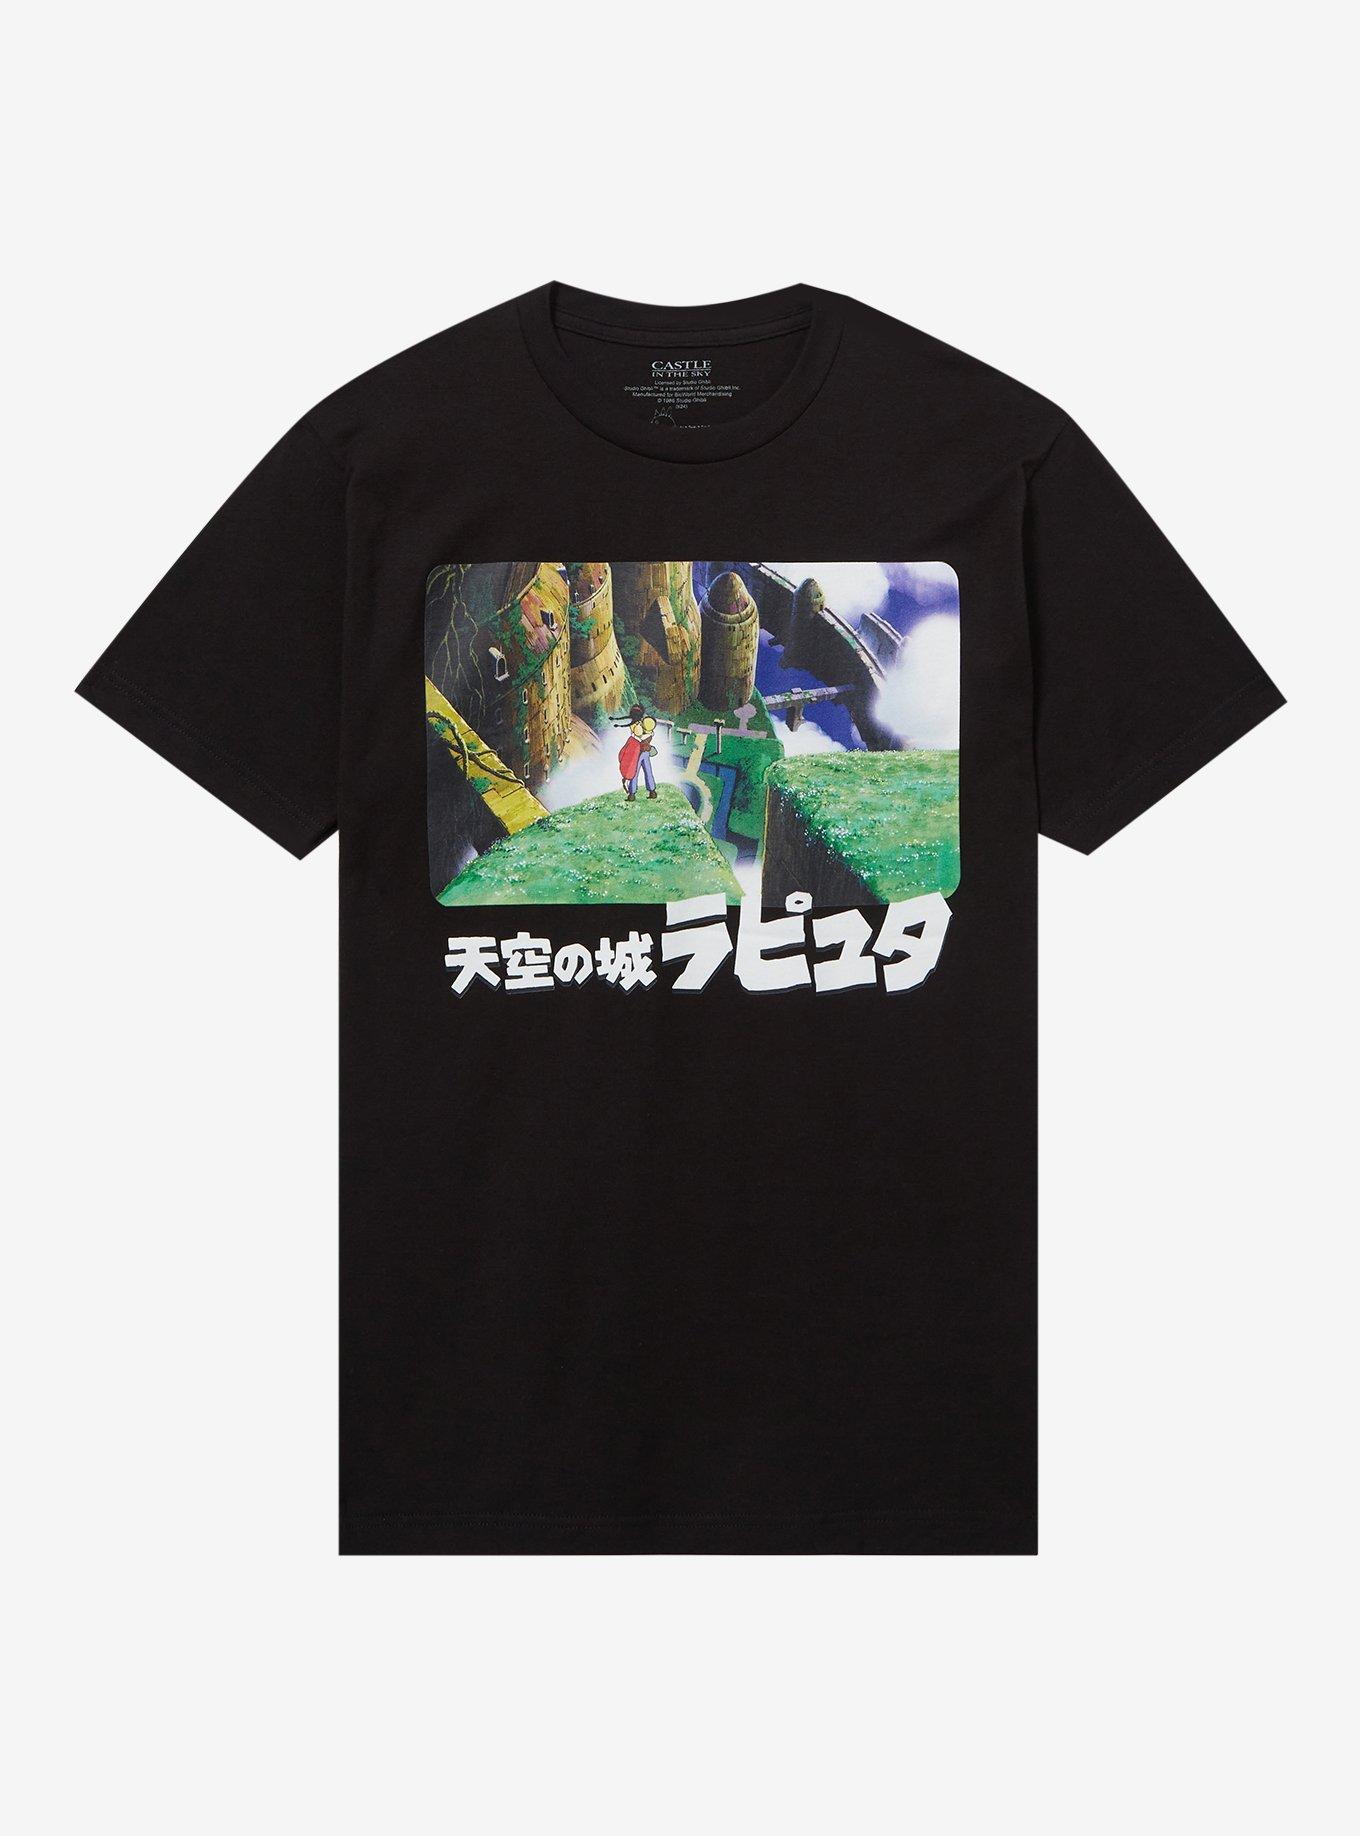 Studio Ghibli Castle In The Sky Two-Sided T-Shirt, BLACK, hi-res